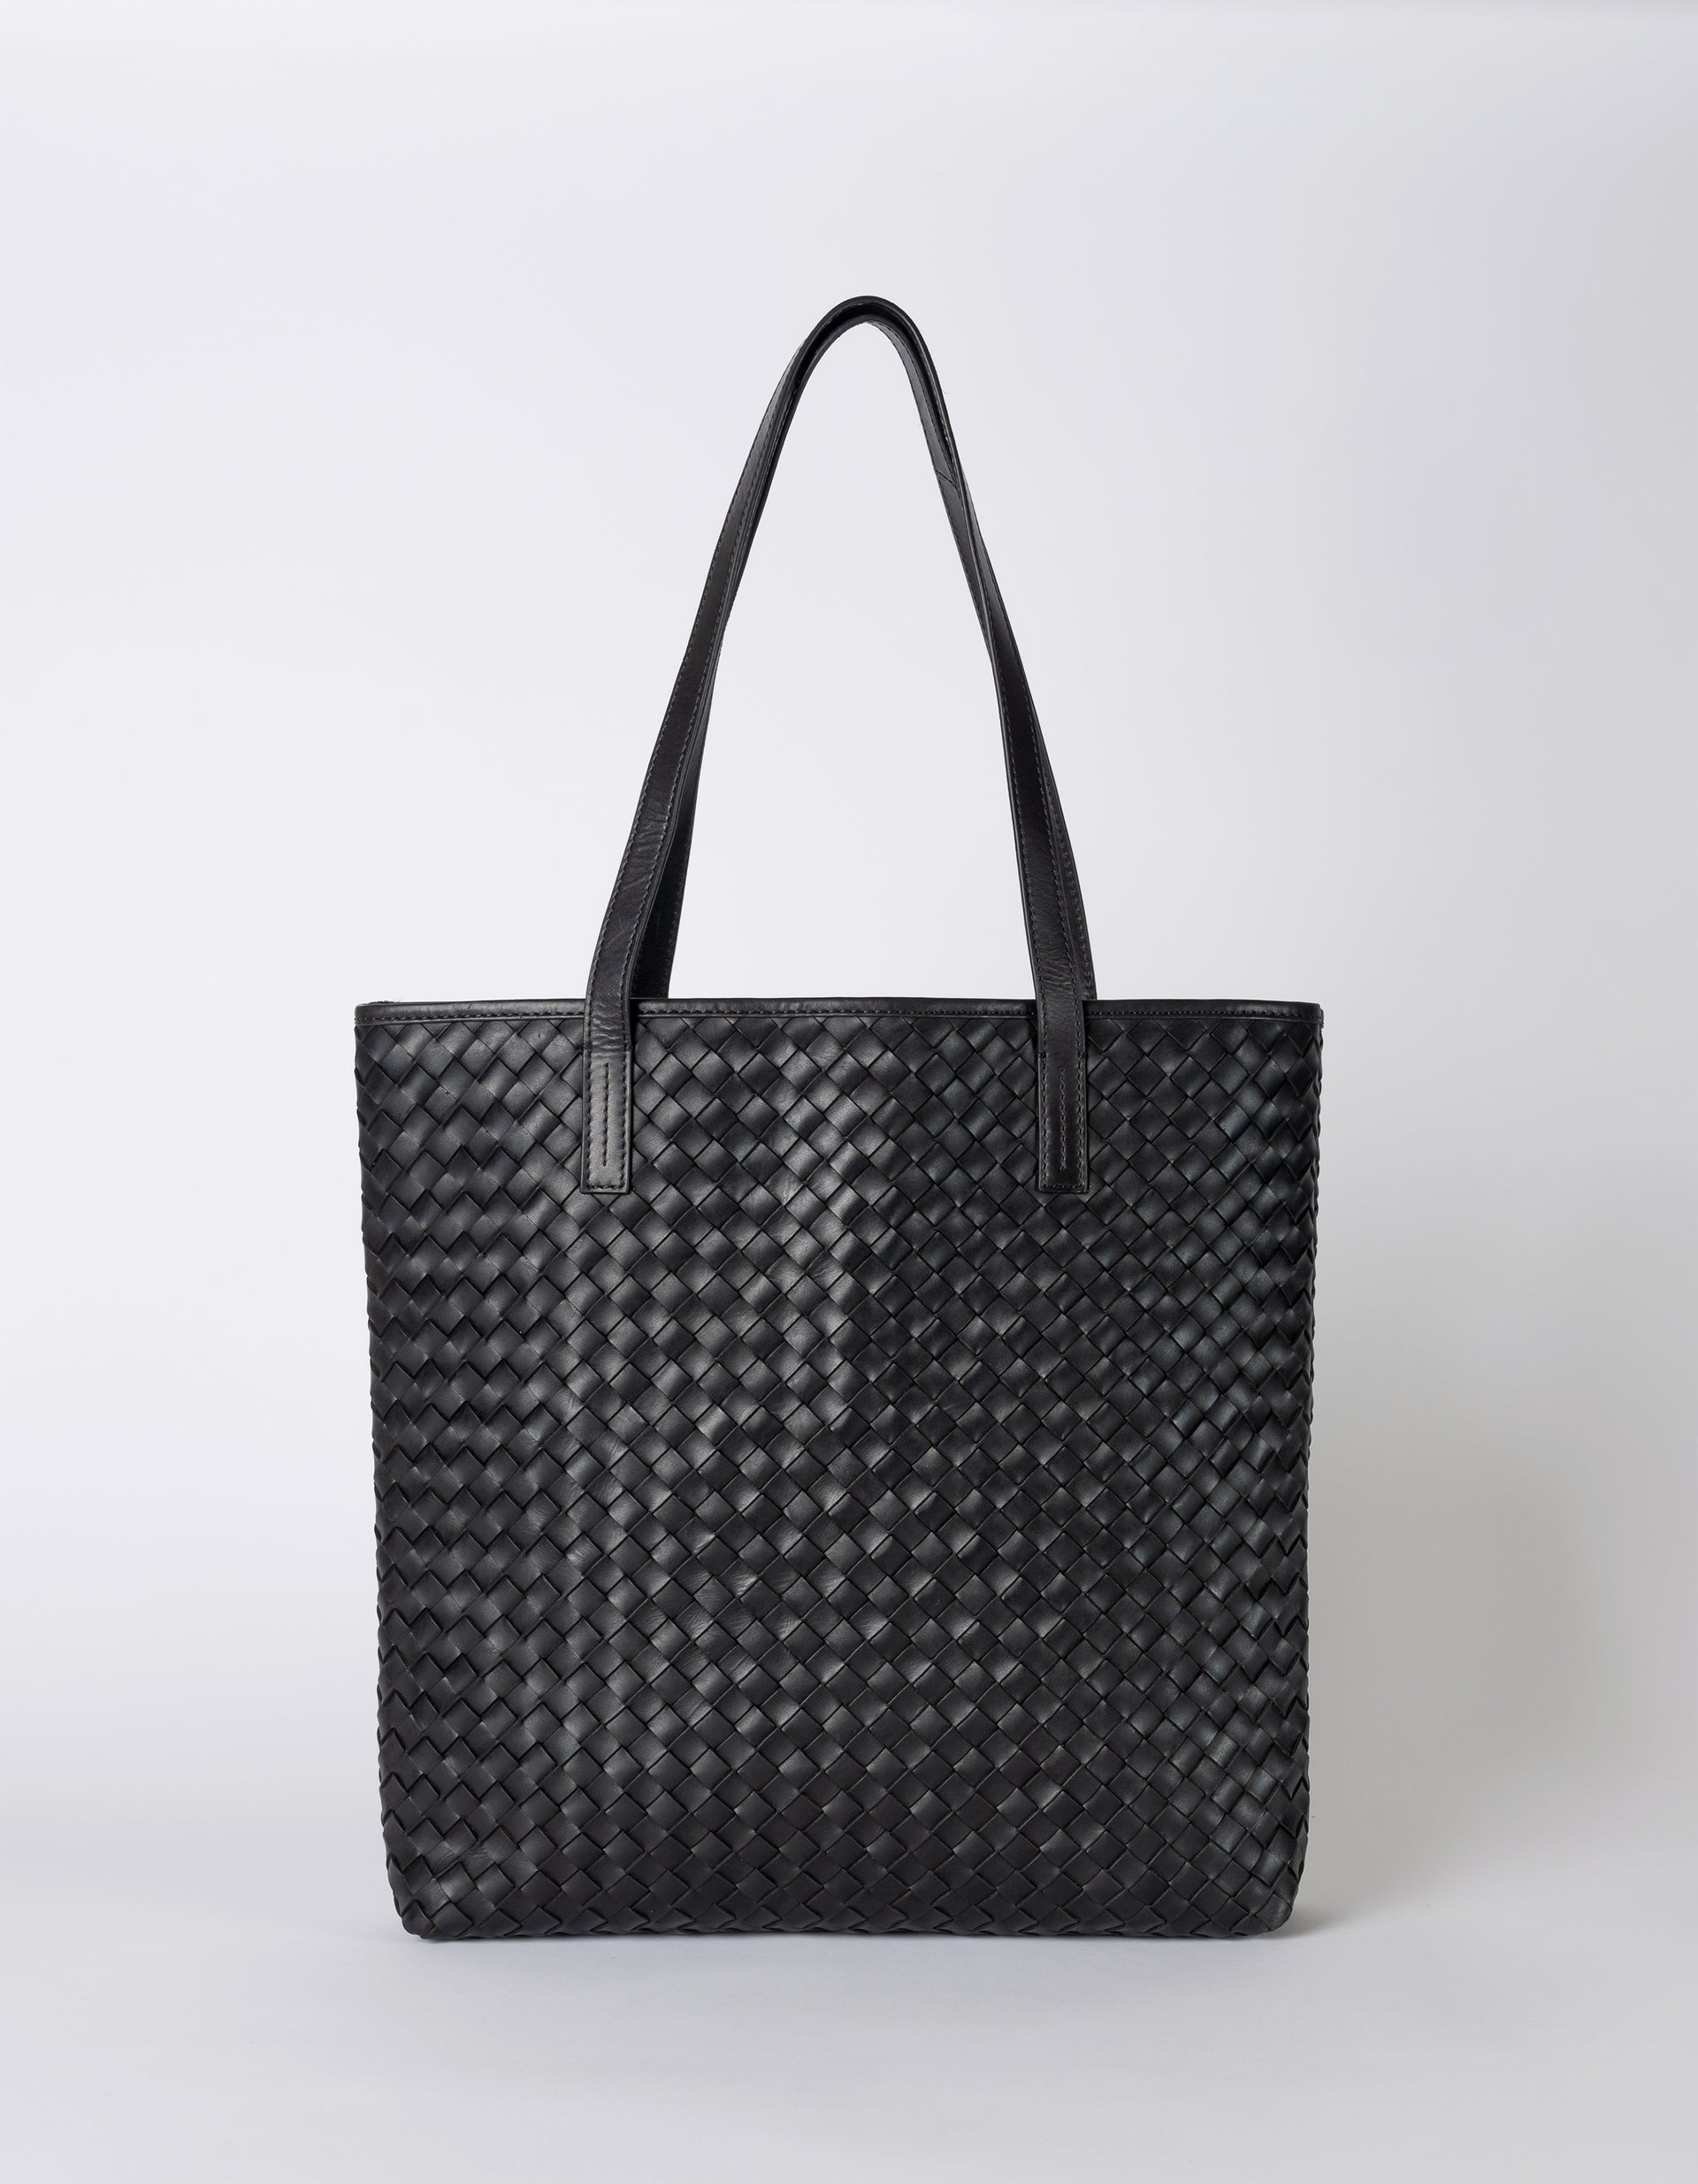 Georgia tote in black woven leather, front view